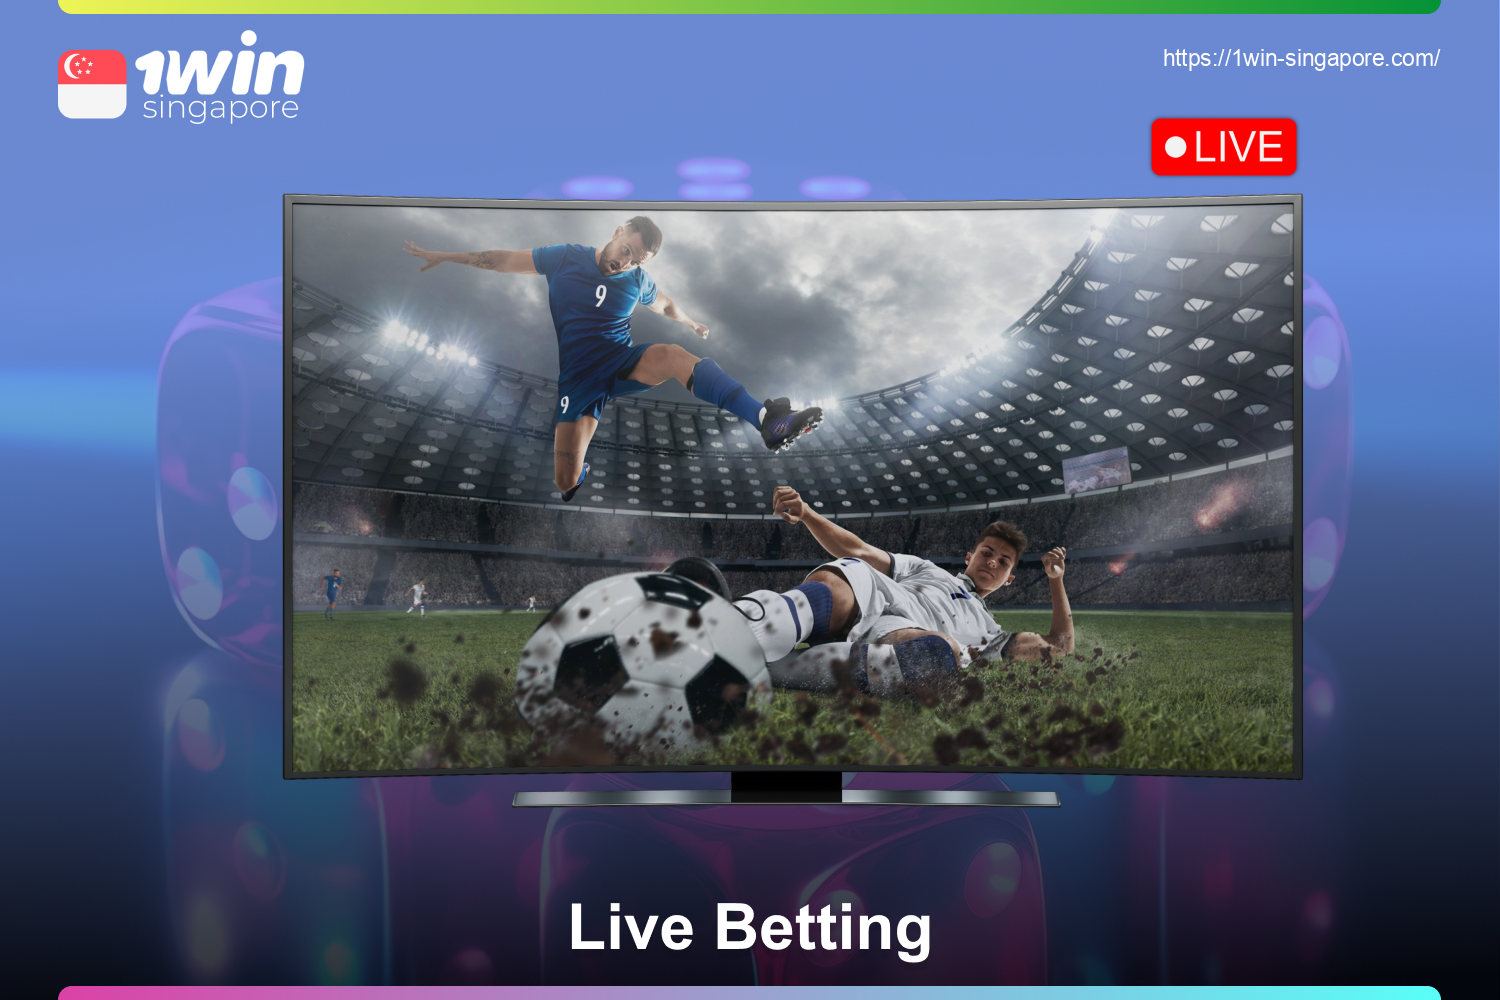 Live sports betting is a very important aspect of 1win, which is very popular among players in Singapore